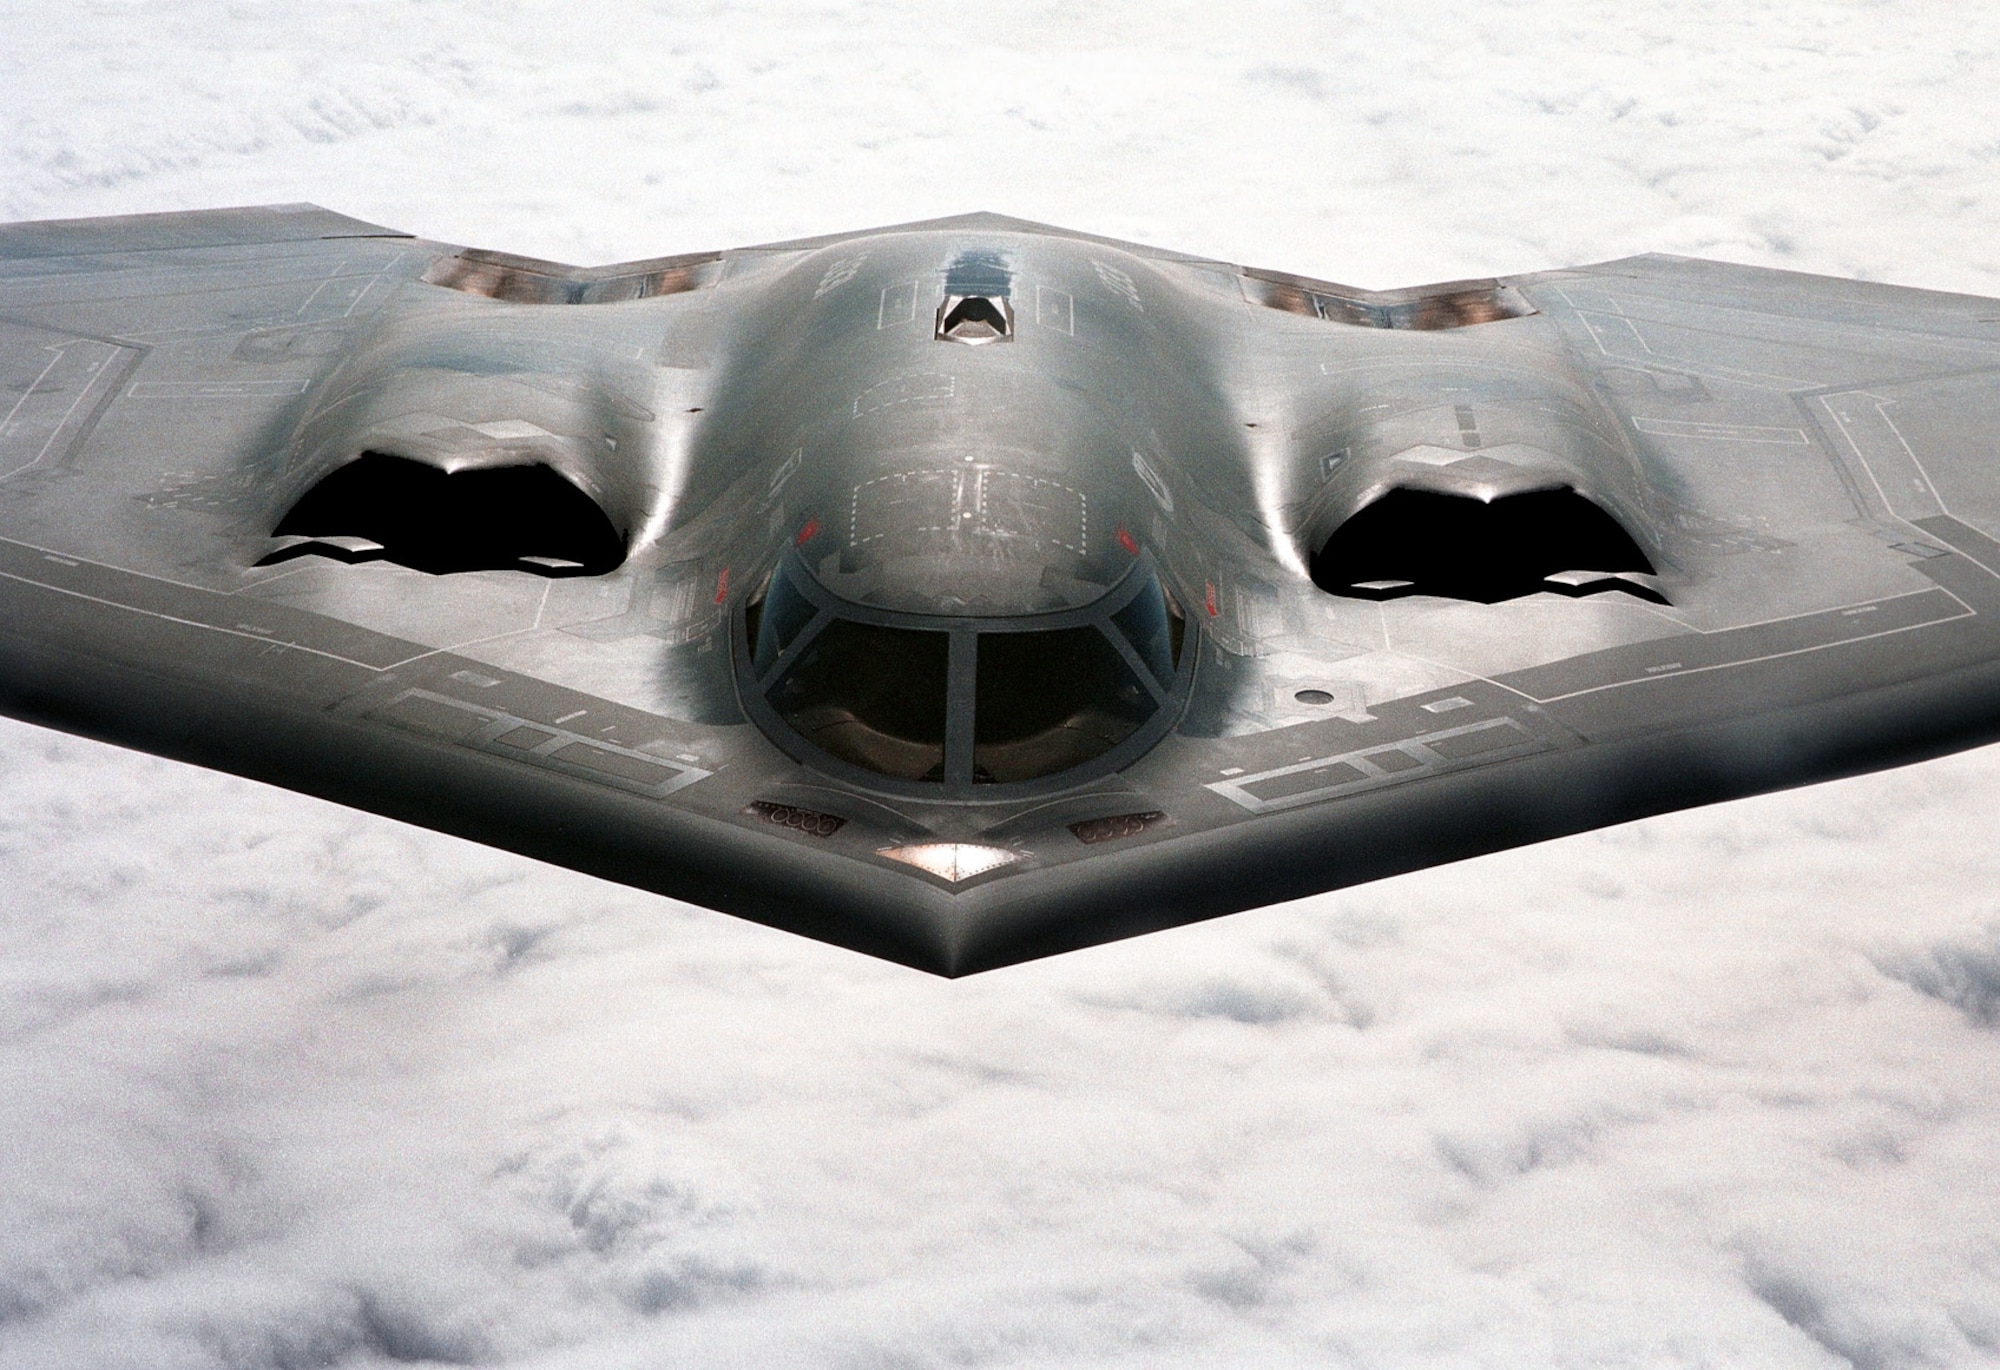 OVER KANSAS -- The B-2 Spirit bomber is a revolutionary blending of low-observable technologies with high aerodynamic efficiency and large payload gives the B-2 important advantages over existing bombers. Its unrefueled range is approximately 6,000 nautical miles. Many aspects of the low-observability process remain classified; however, the B-2's composite materials, special coatings and flying-wing design all contribute to its "stealthiness." (U.S. Air Force photo by Staff Sgt. Mark Olsen)

